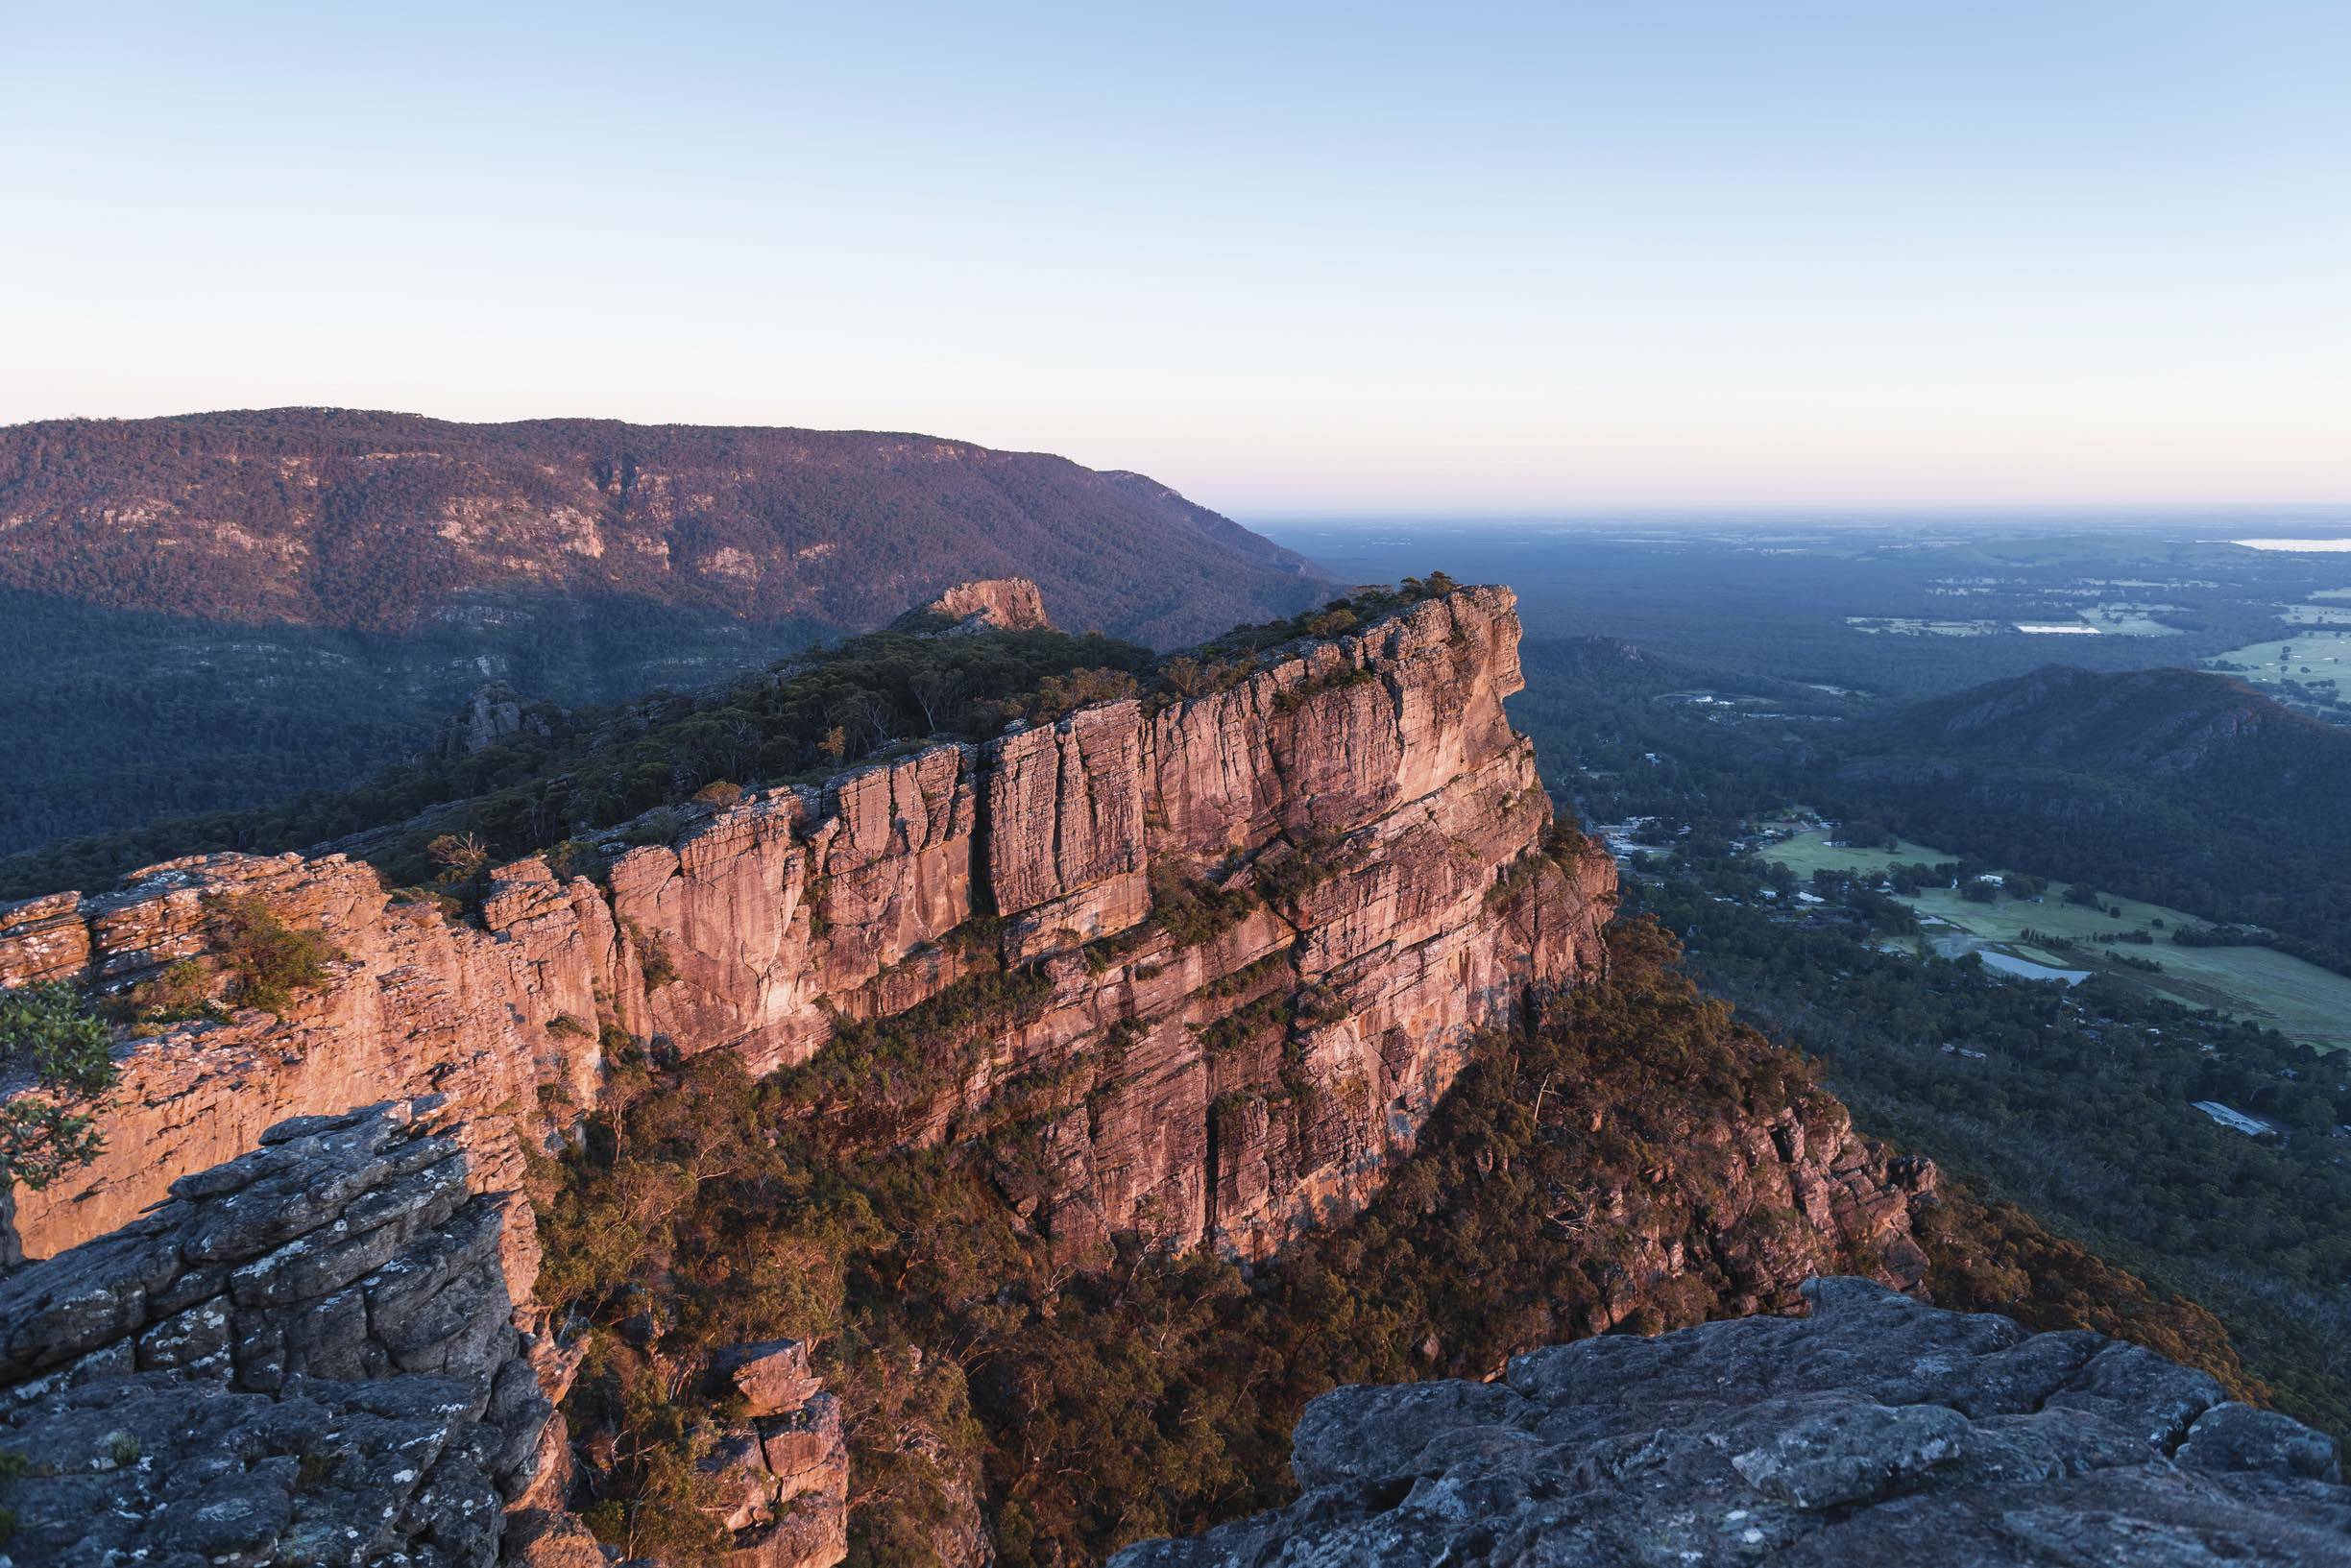 What can you see at the Grampians?